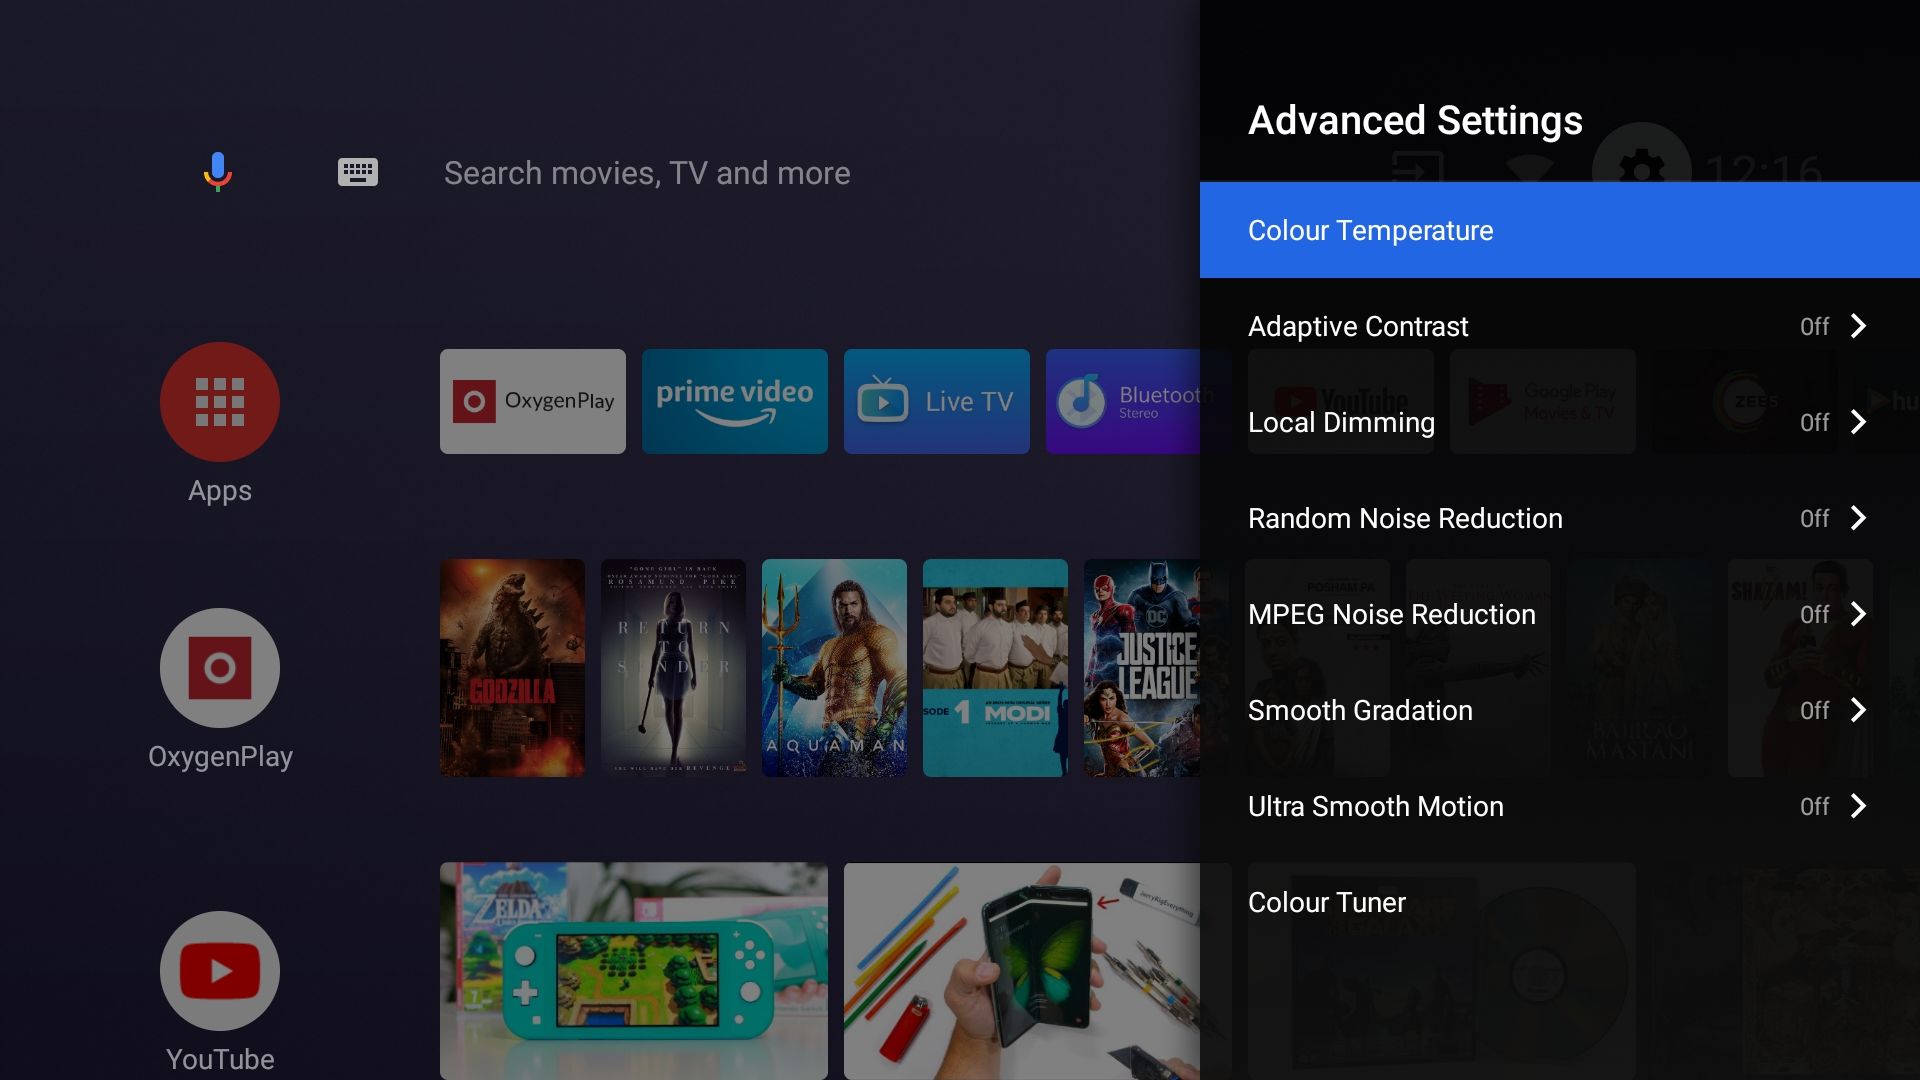 OnePlus TV advanced picture tuning options